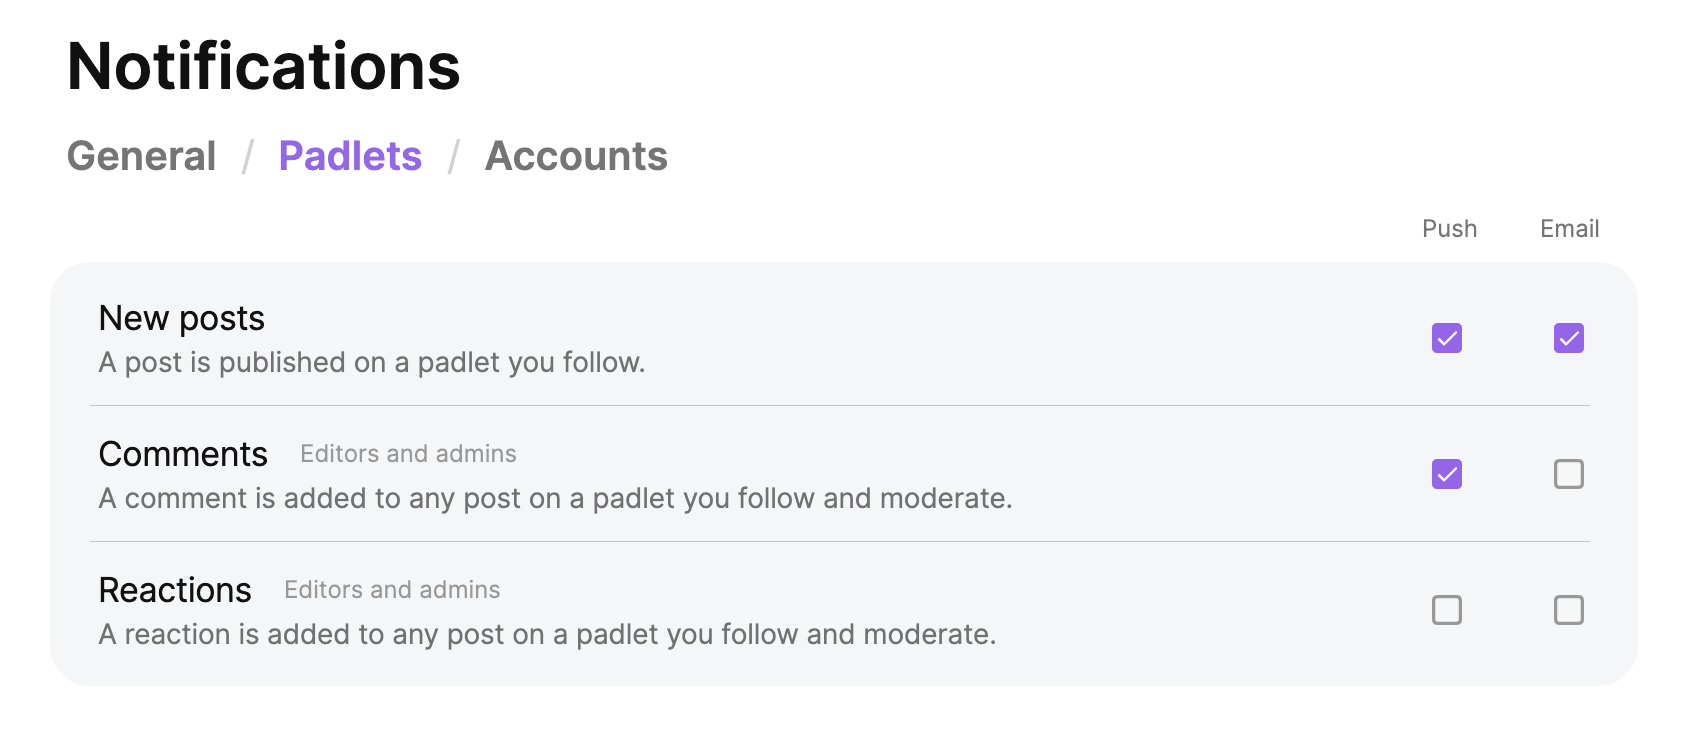 The Notifications page in your settings, showing the default notifications settings for padlets